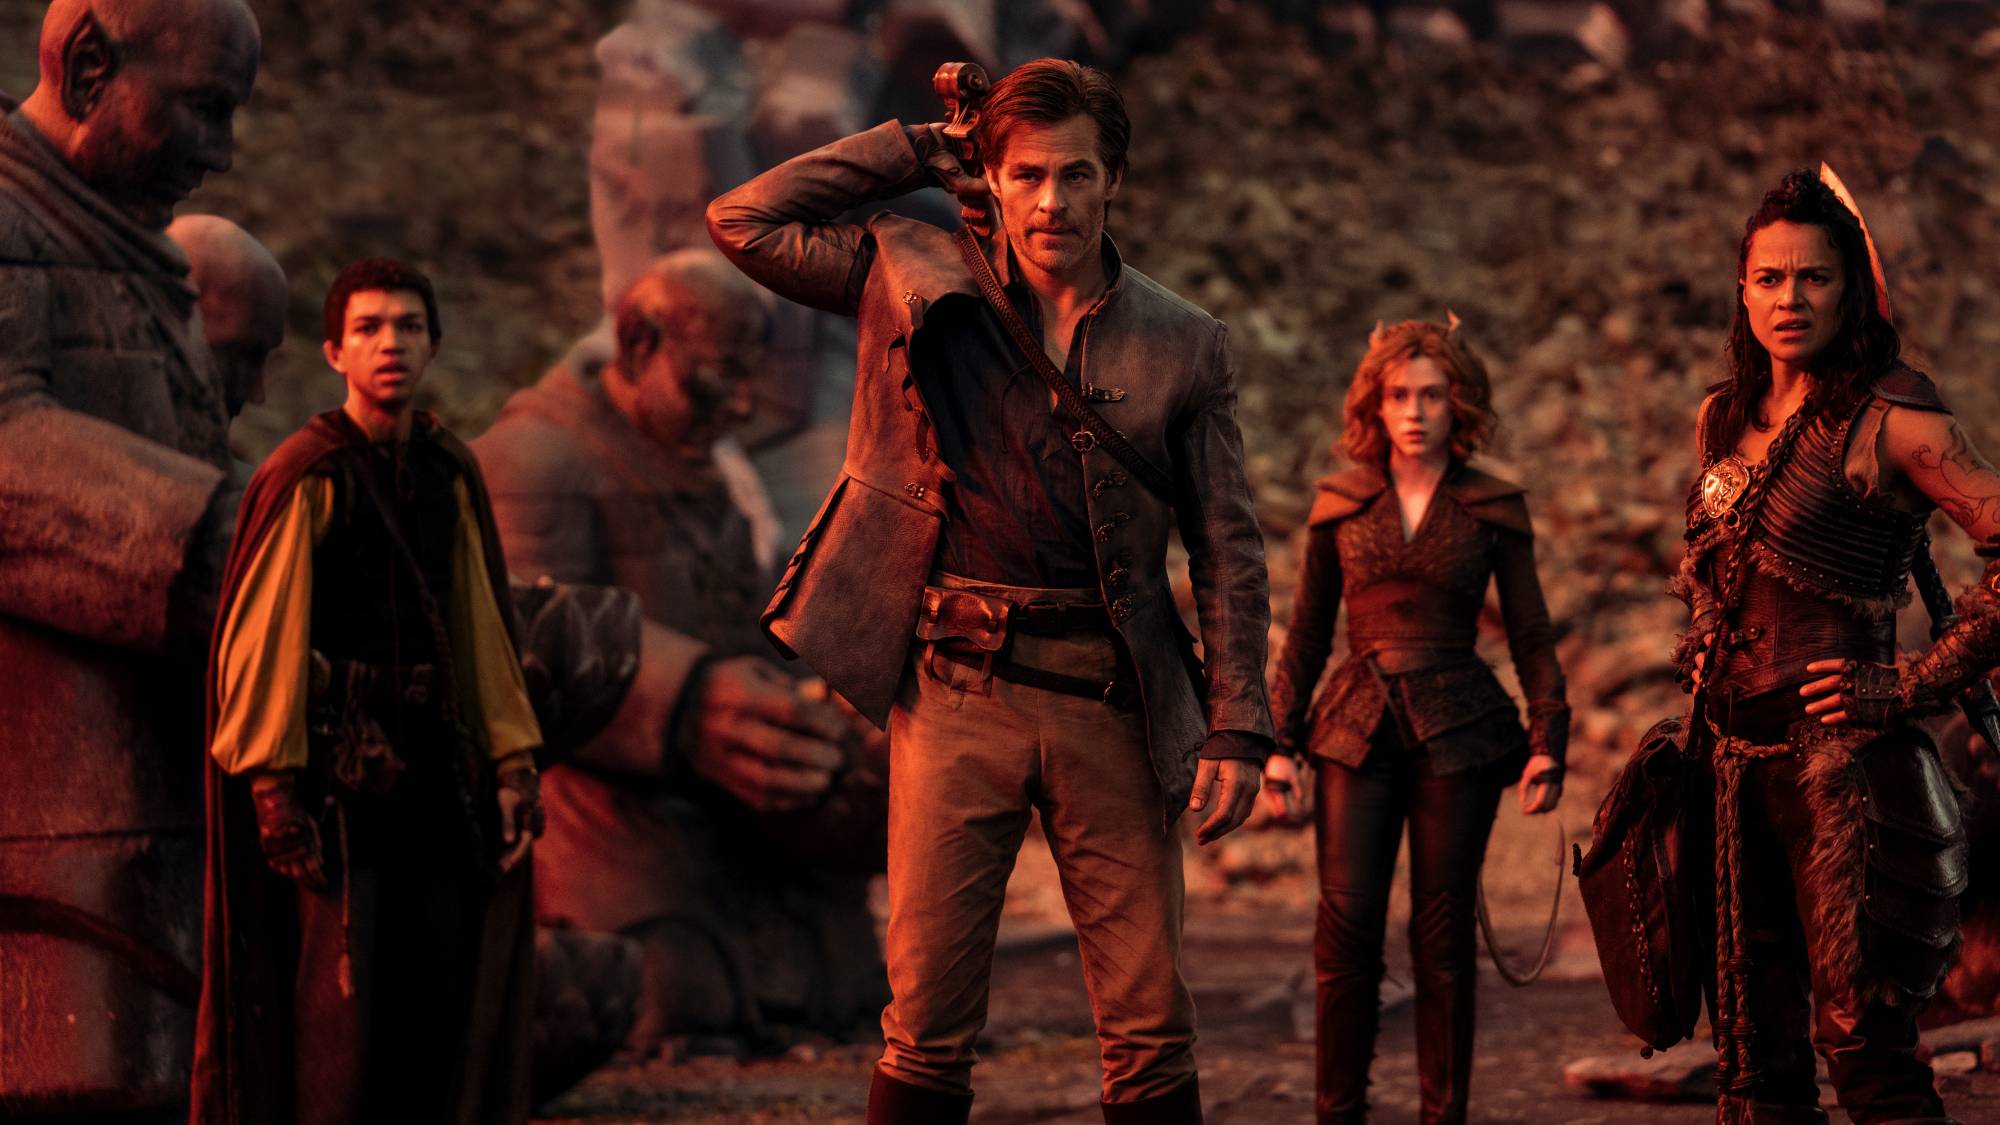 'Dungeons & Dragons: Honor Among Thieves' Justice Smith as Simon, Chris Pine as Edgin, Sophia Lillis as Doric, and Michelle Rodriguez as Holga standing in front of statues looking worried.